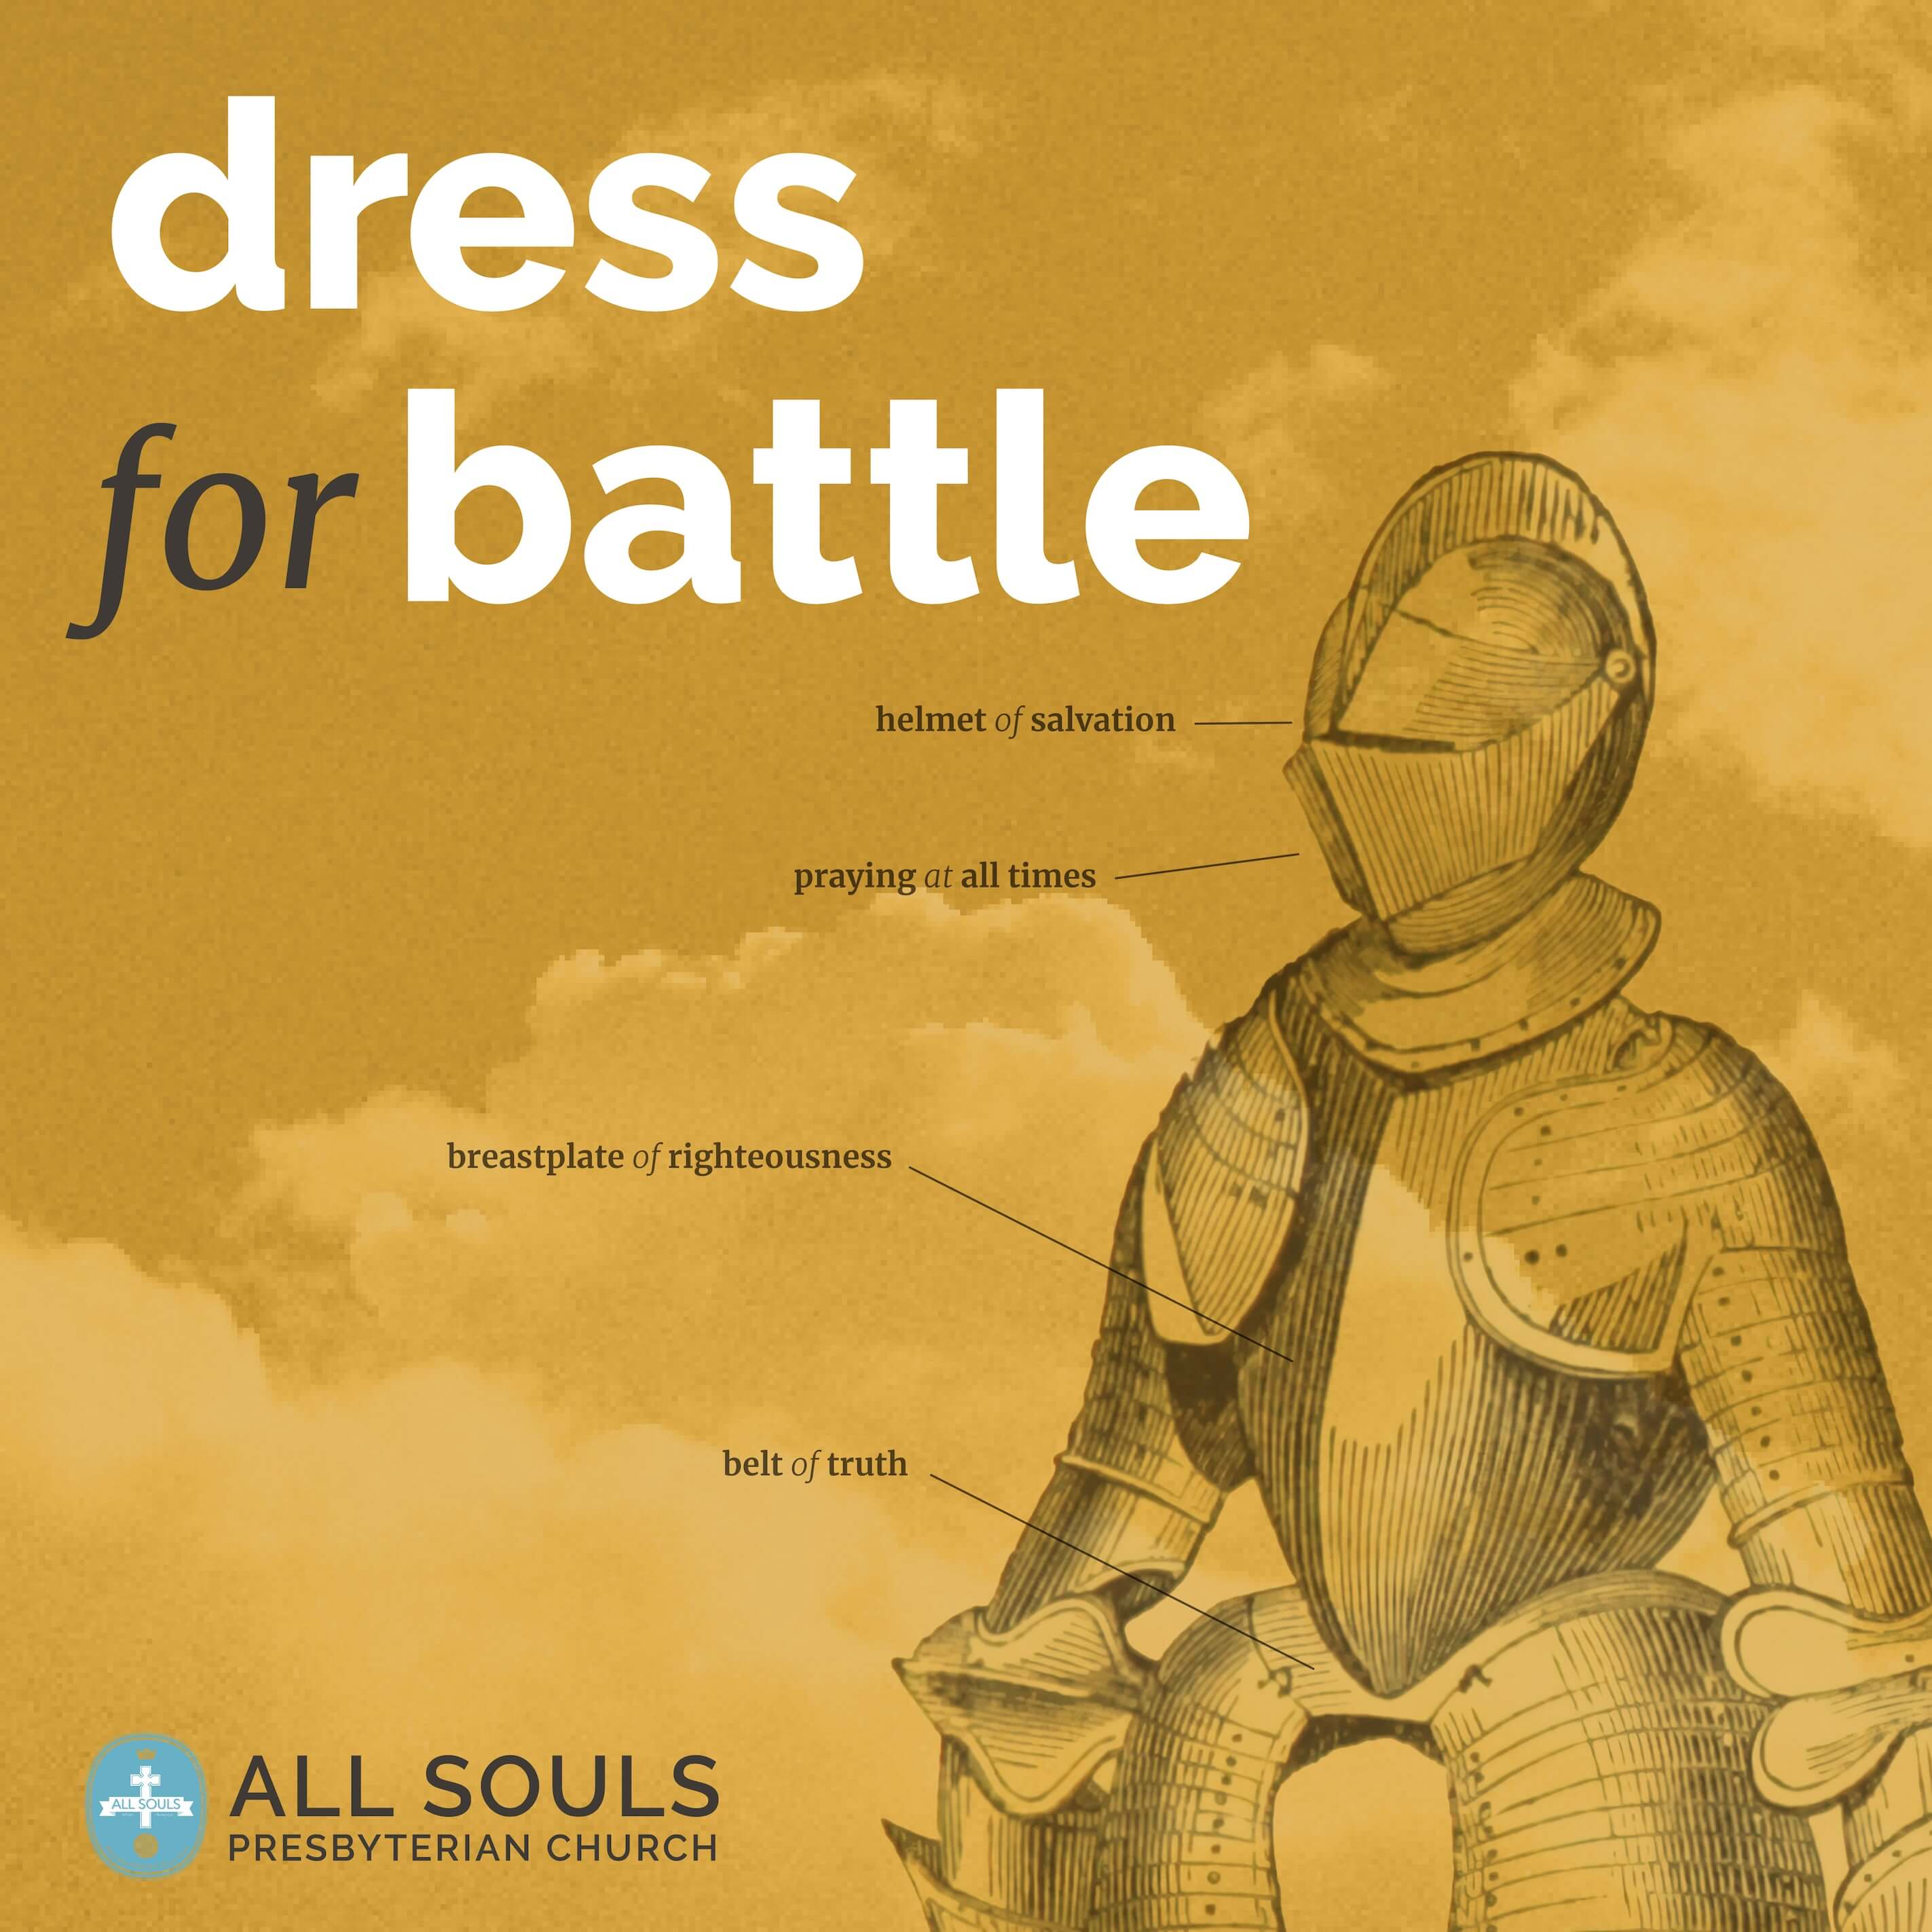 the title The Armor of Go on a yellow background with clouds and a suit of armor